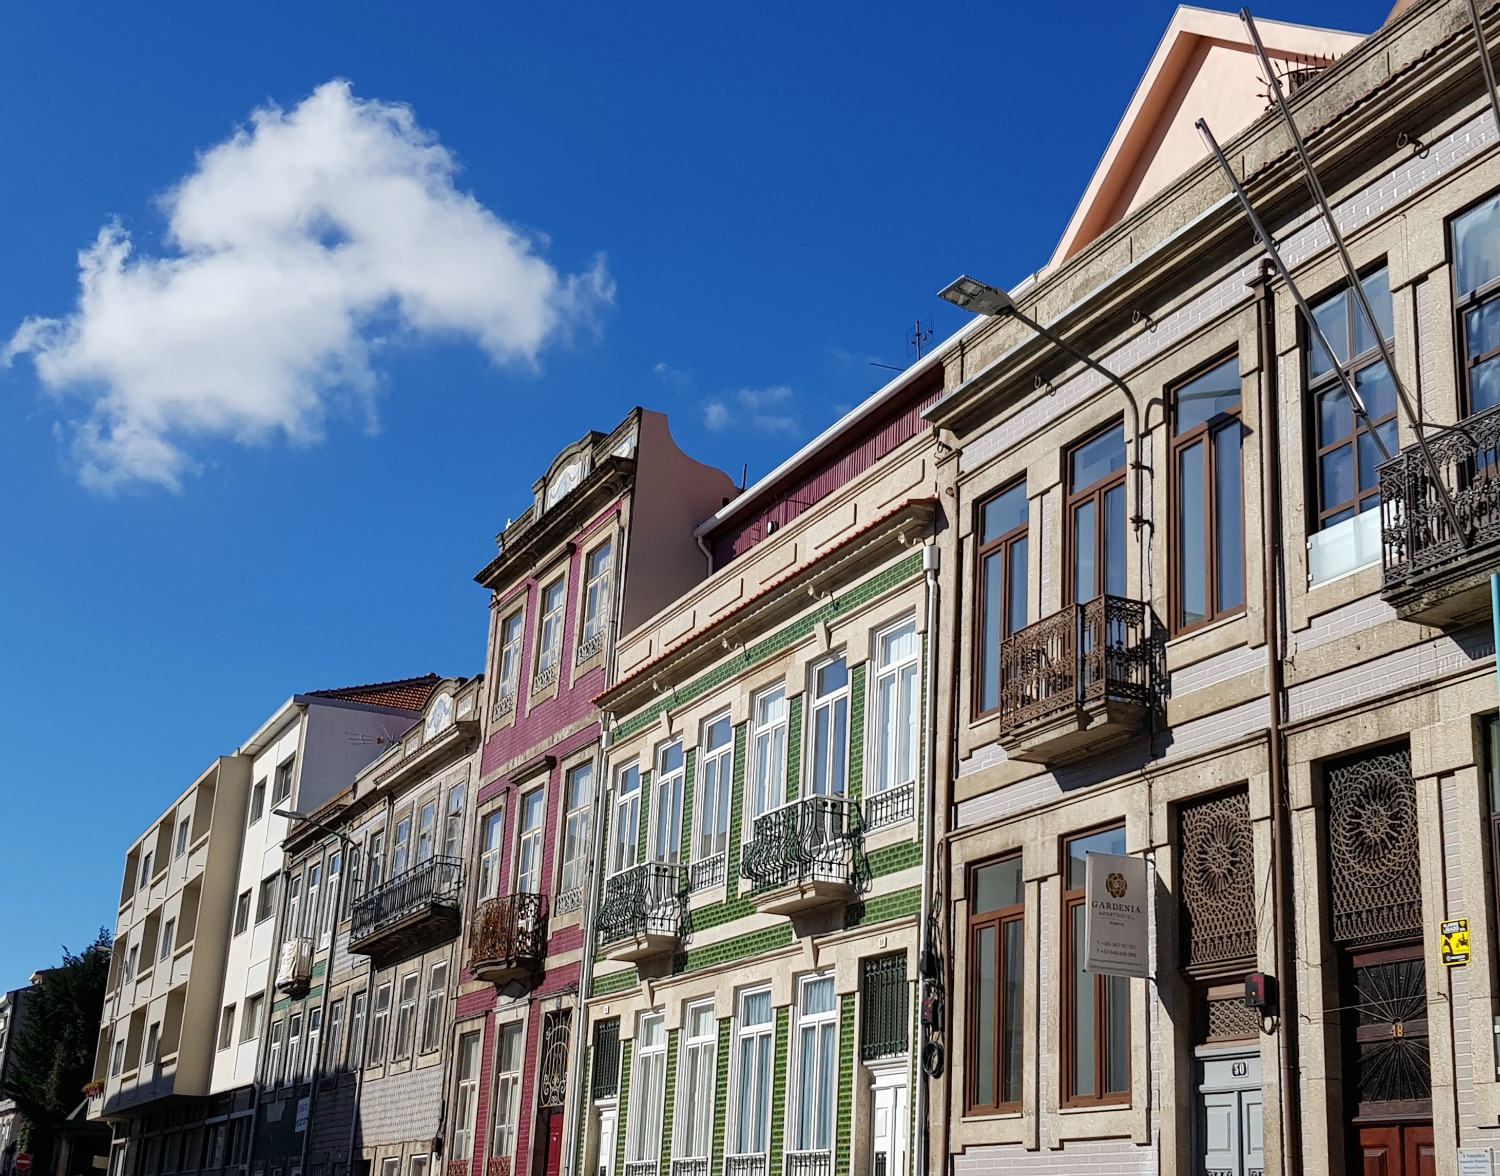 Pastel coloured buildings against a blue sky. Wherever you look in Porto there are wonderful views - exploring on foot is the best way to see them. As for the city's attractions, is the Porto card worth it? Make sure you do your research in advance.